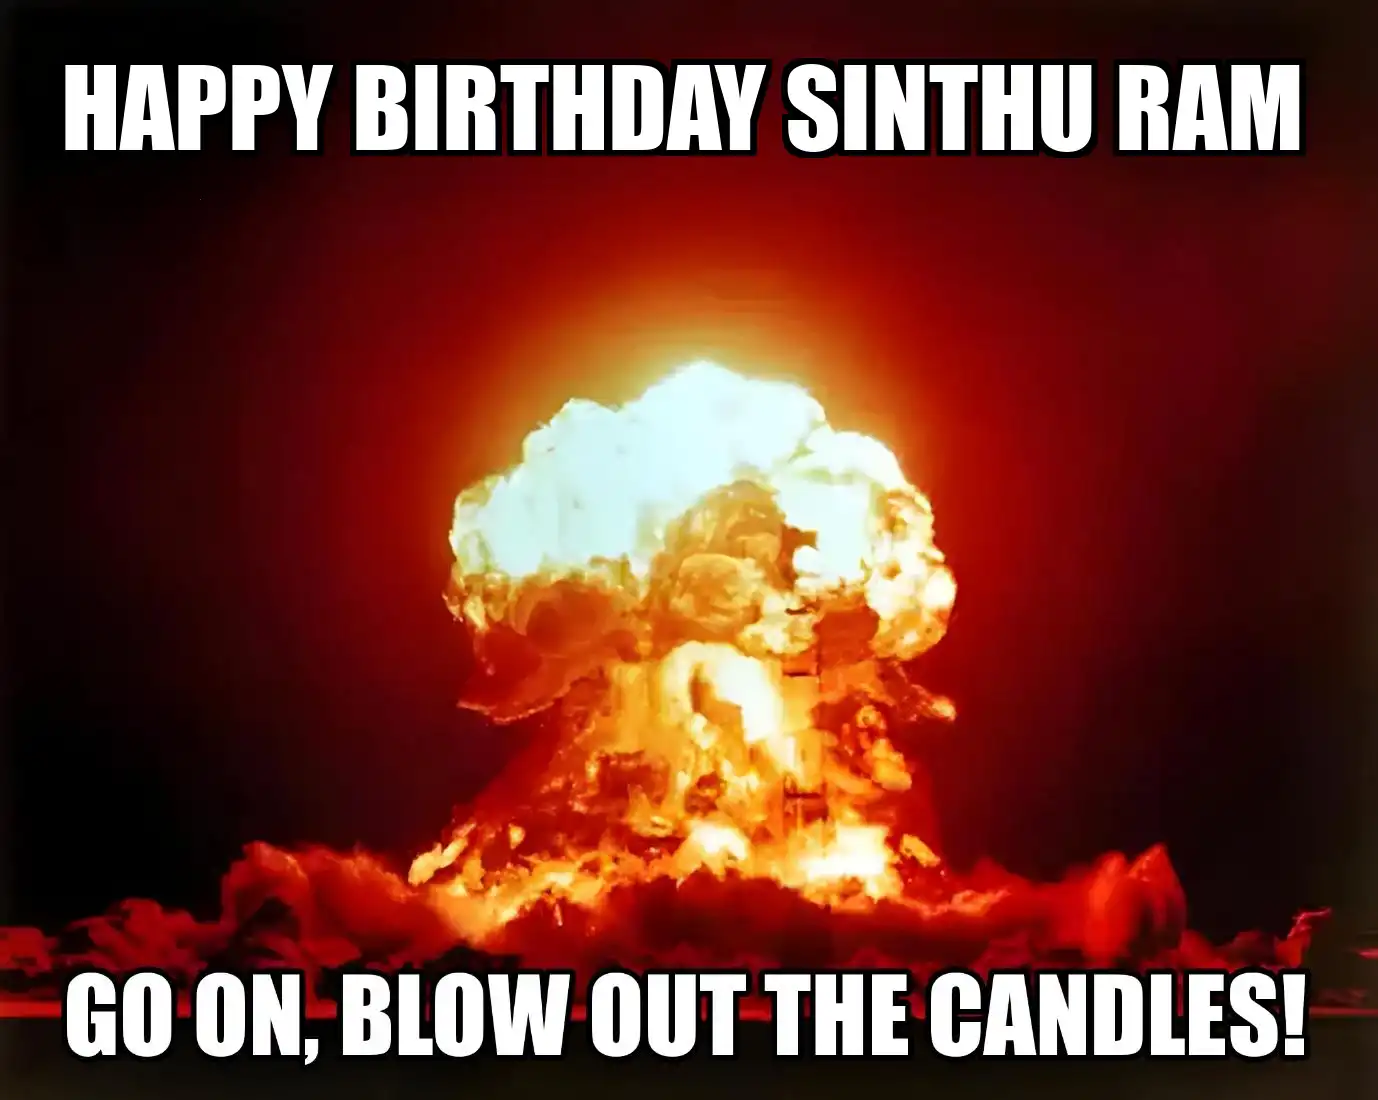 Happy Birthday Sinthu ram Go On Blow Out The Candles Meme